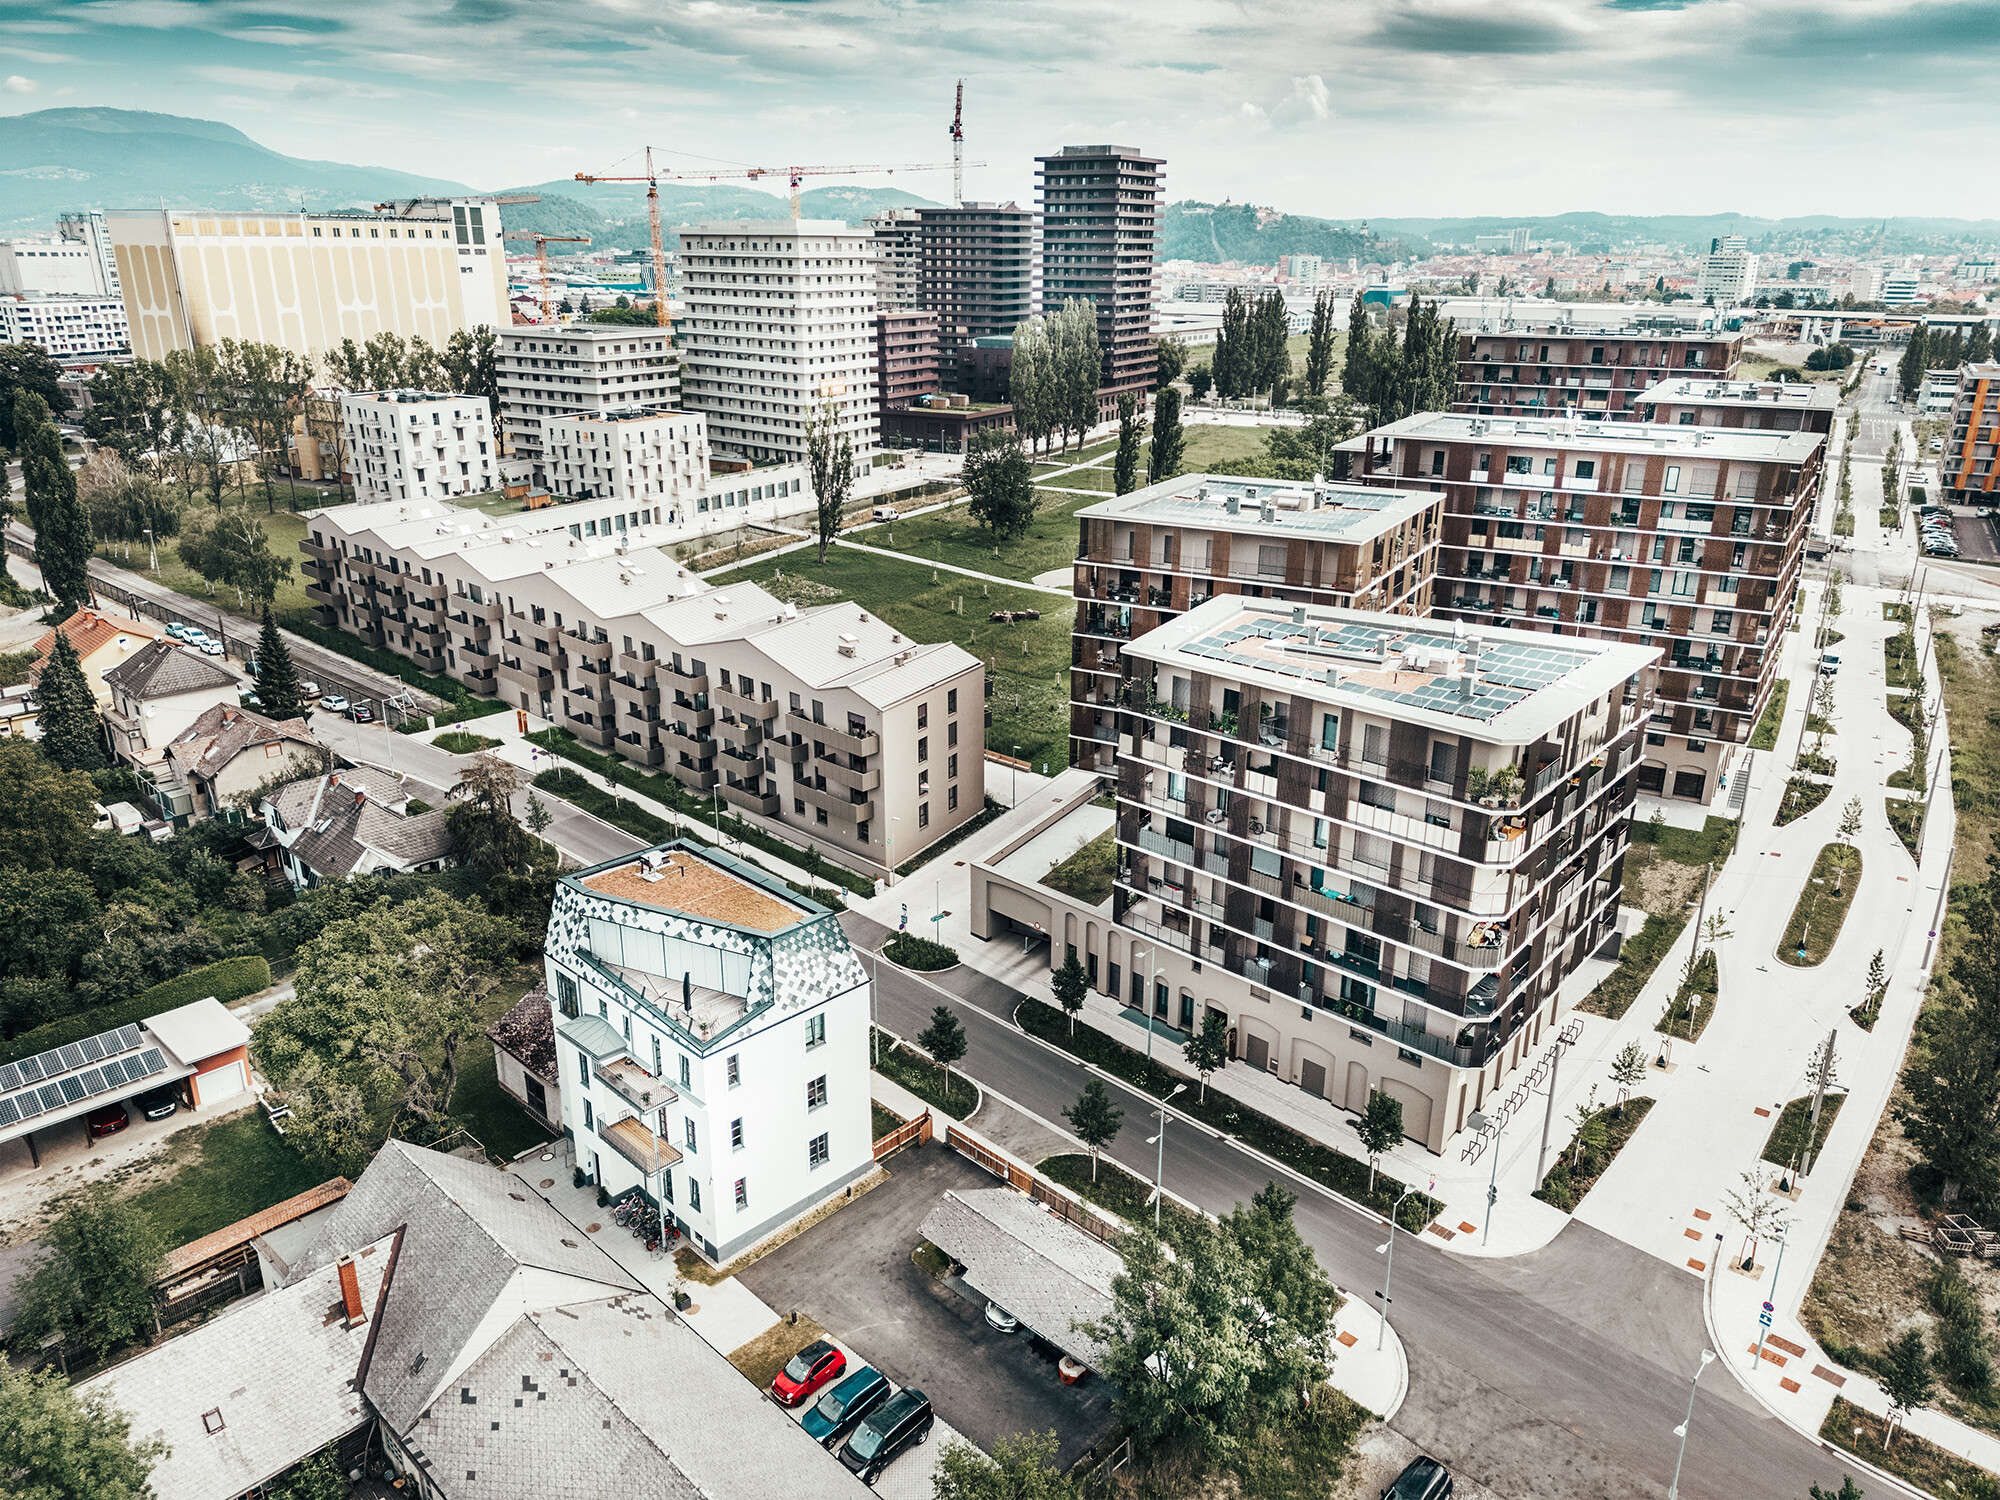 Overview of the Reininghaus quarter with all new buildings.